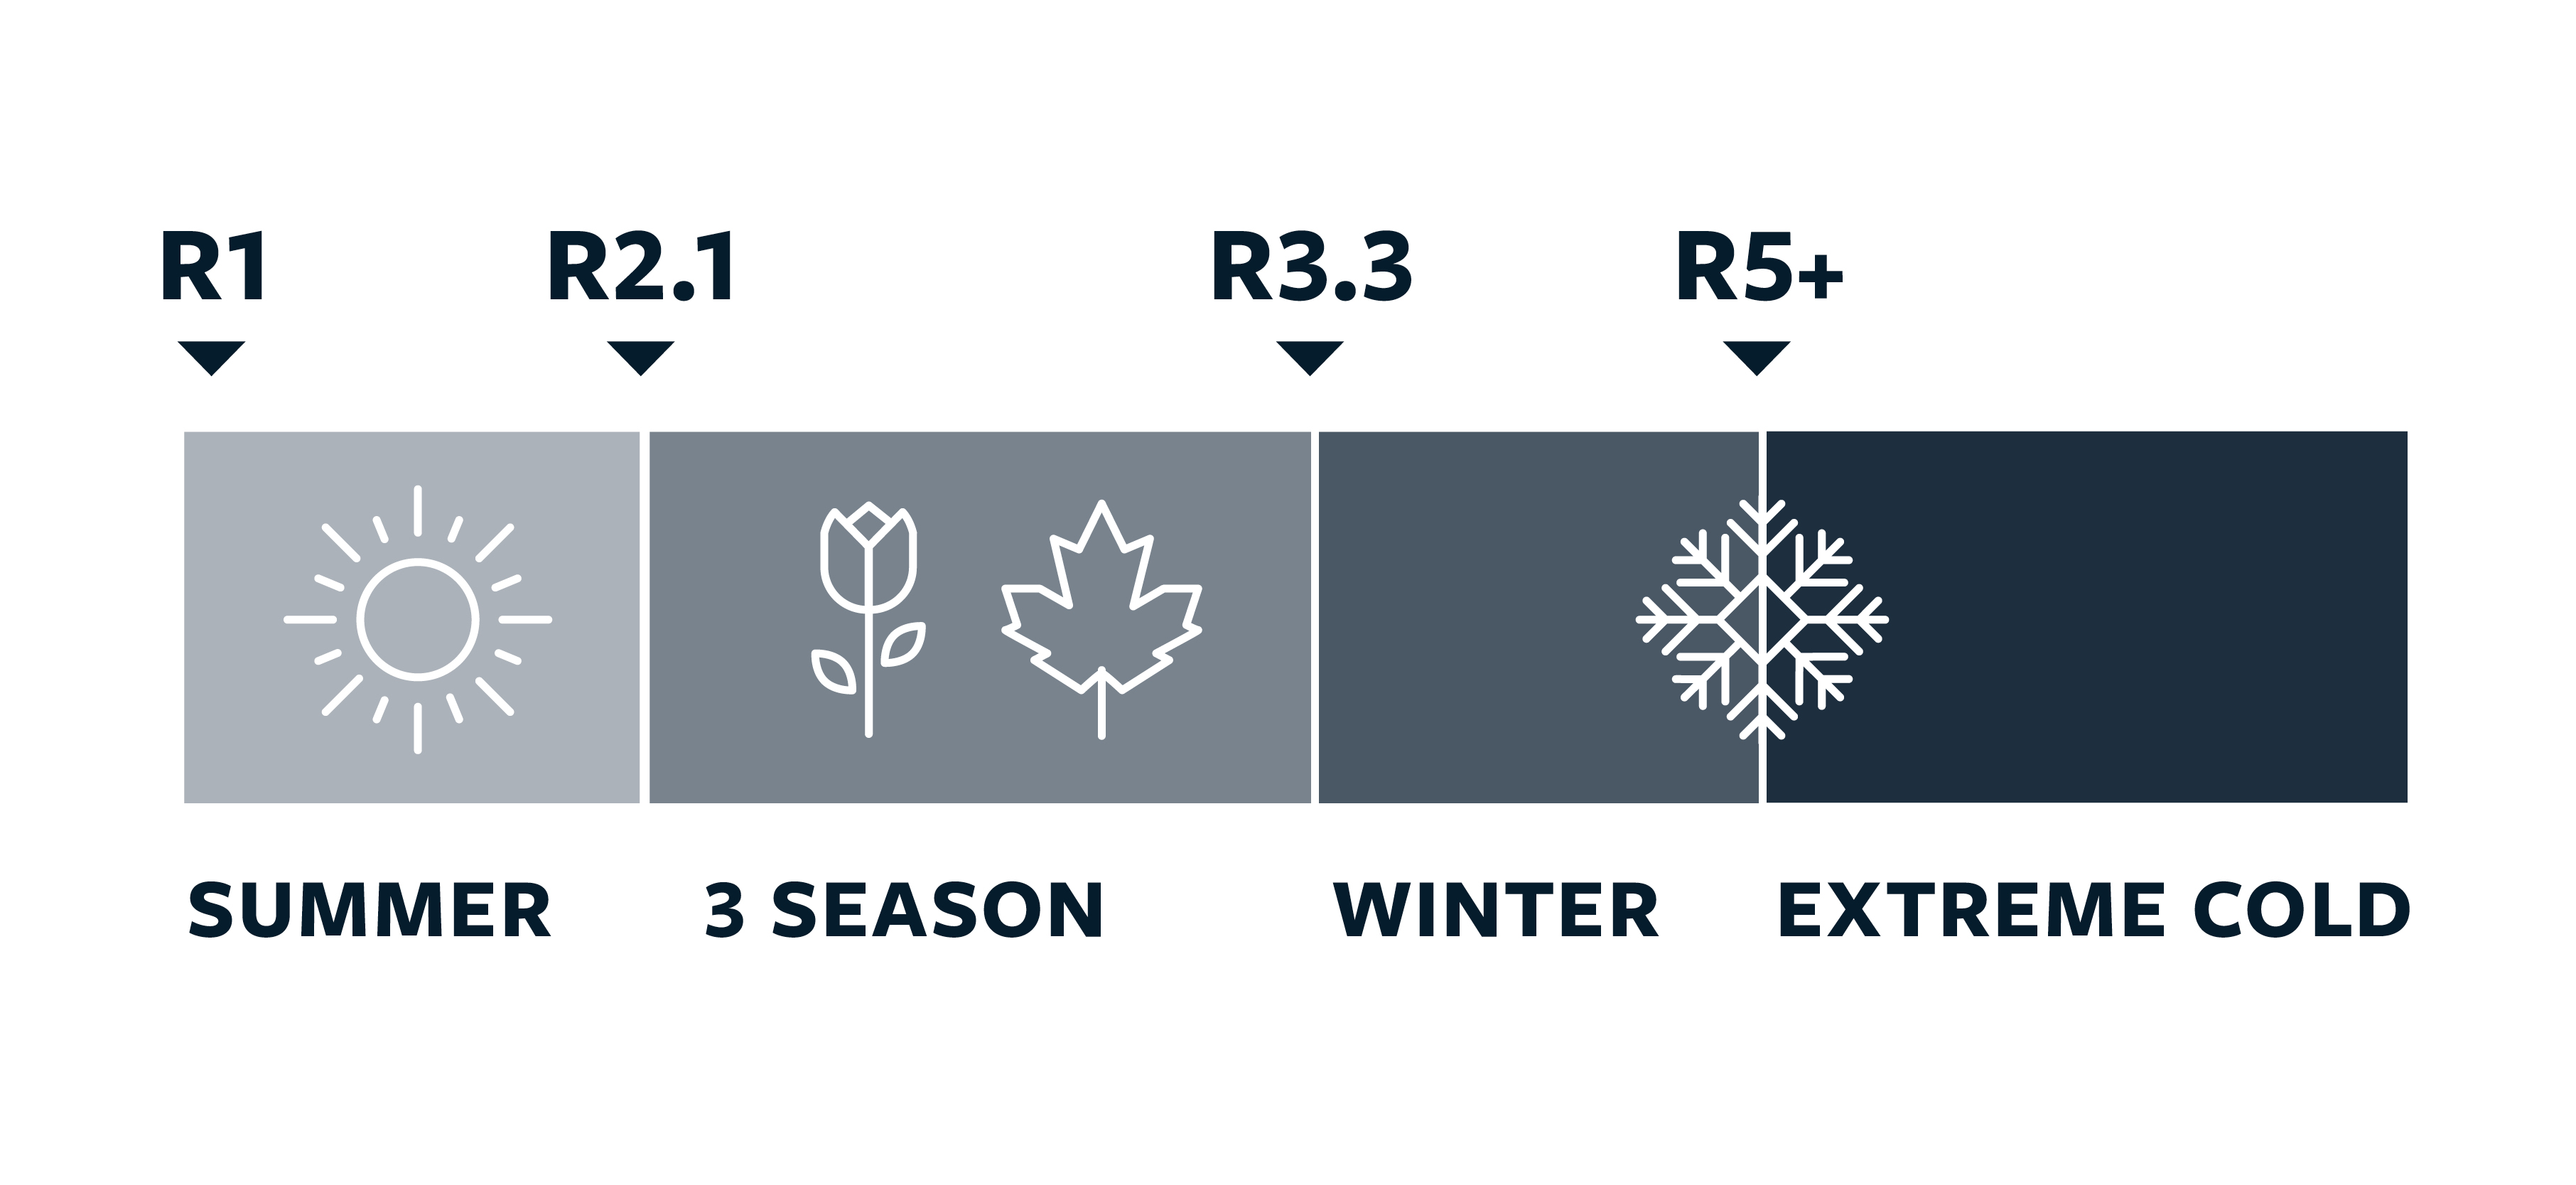 R-Value by Season of Use